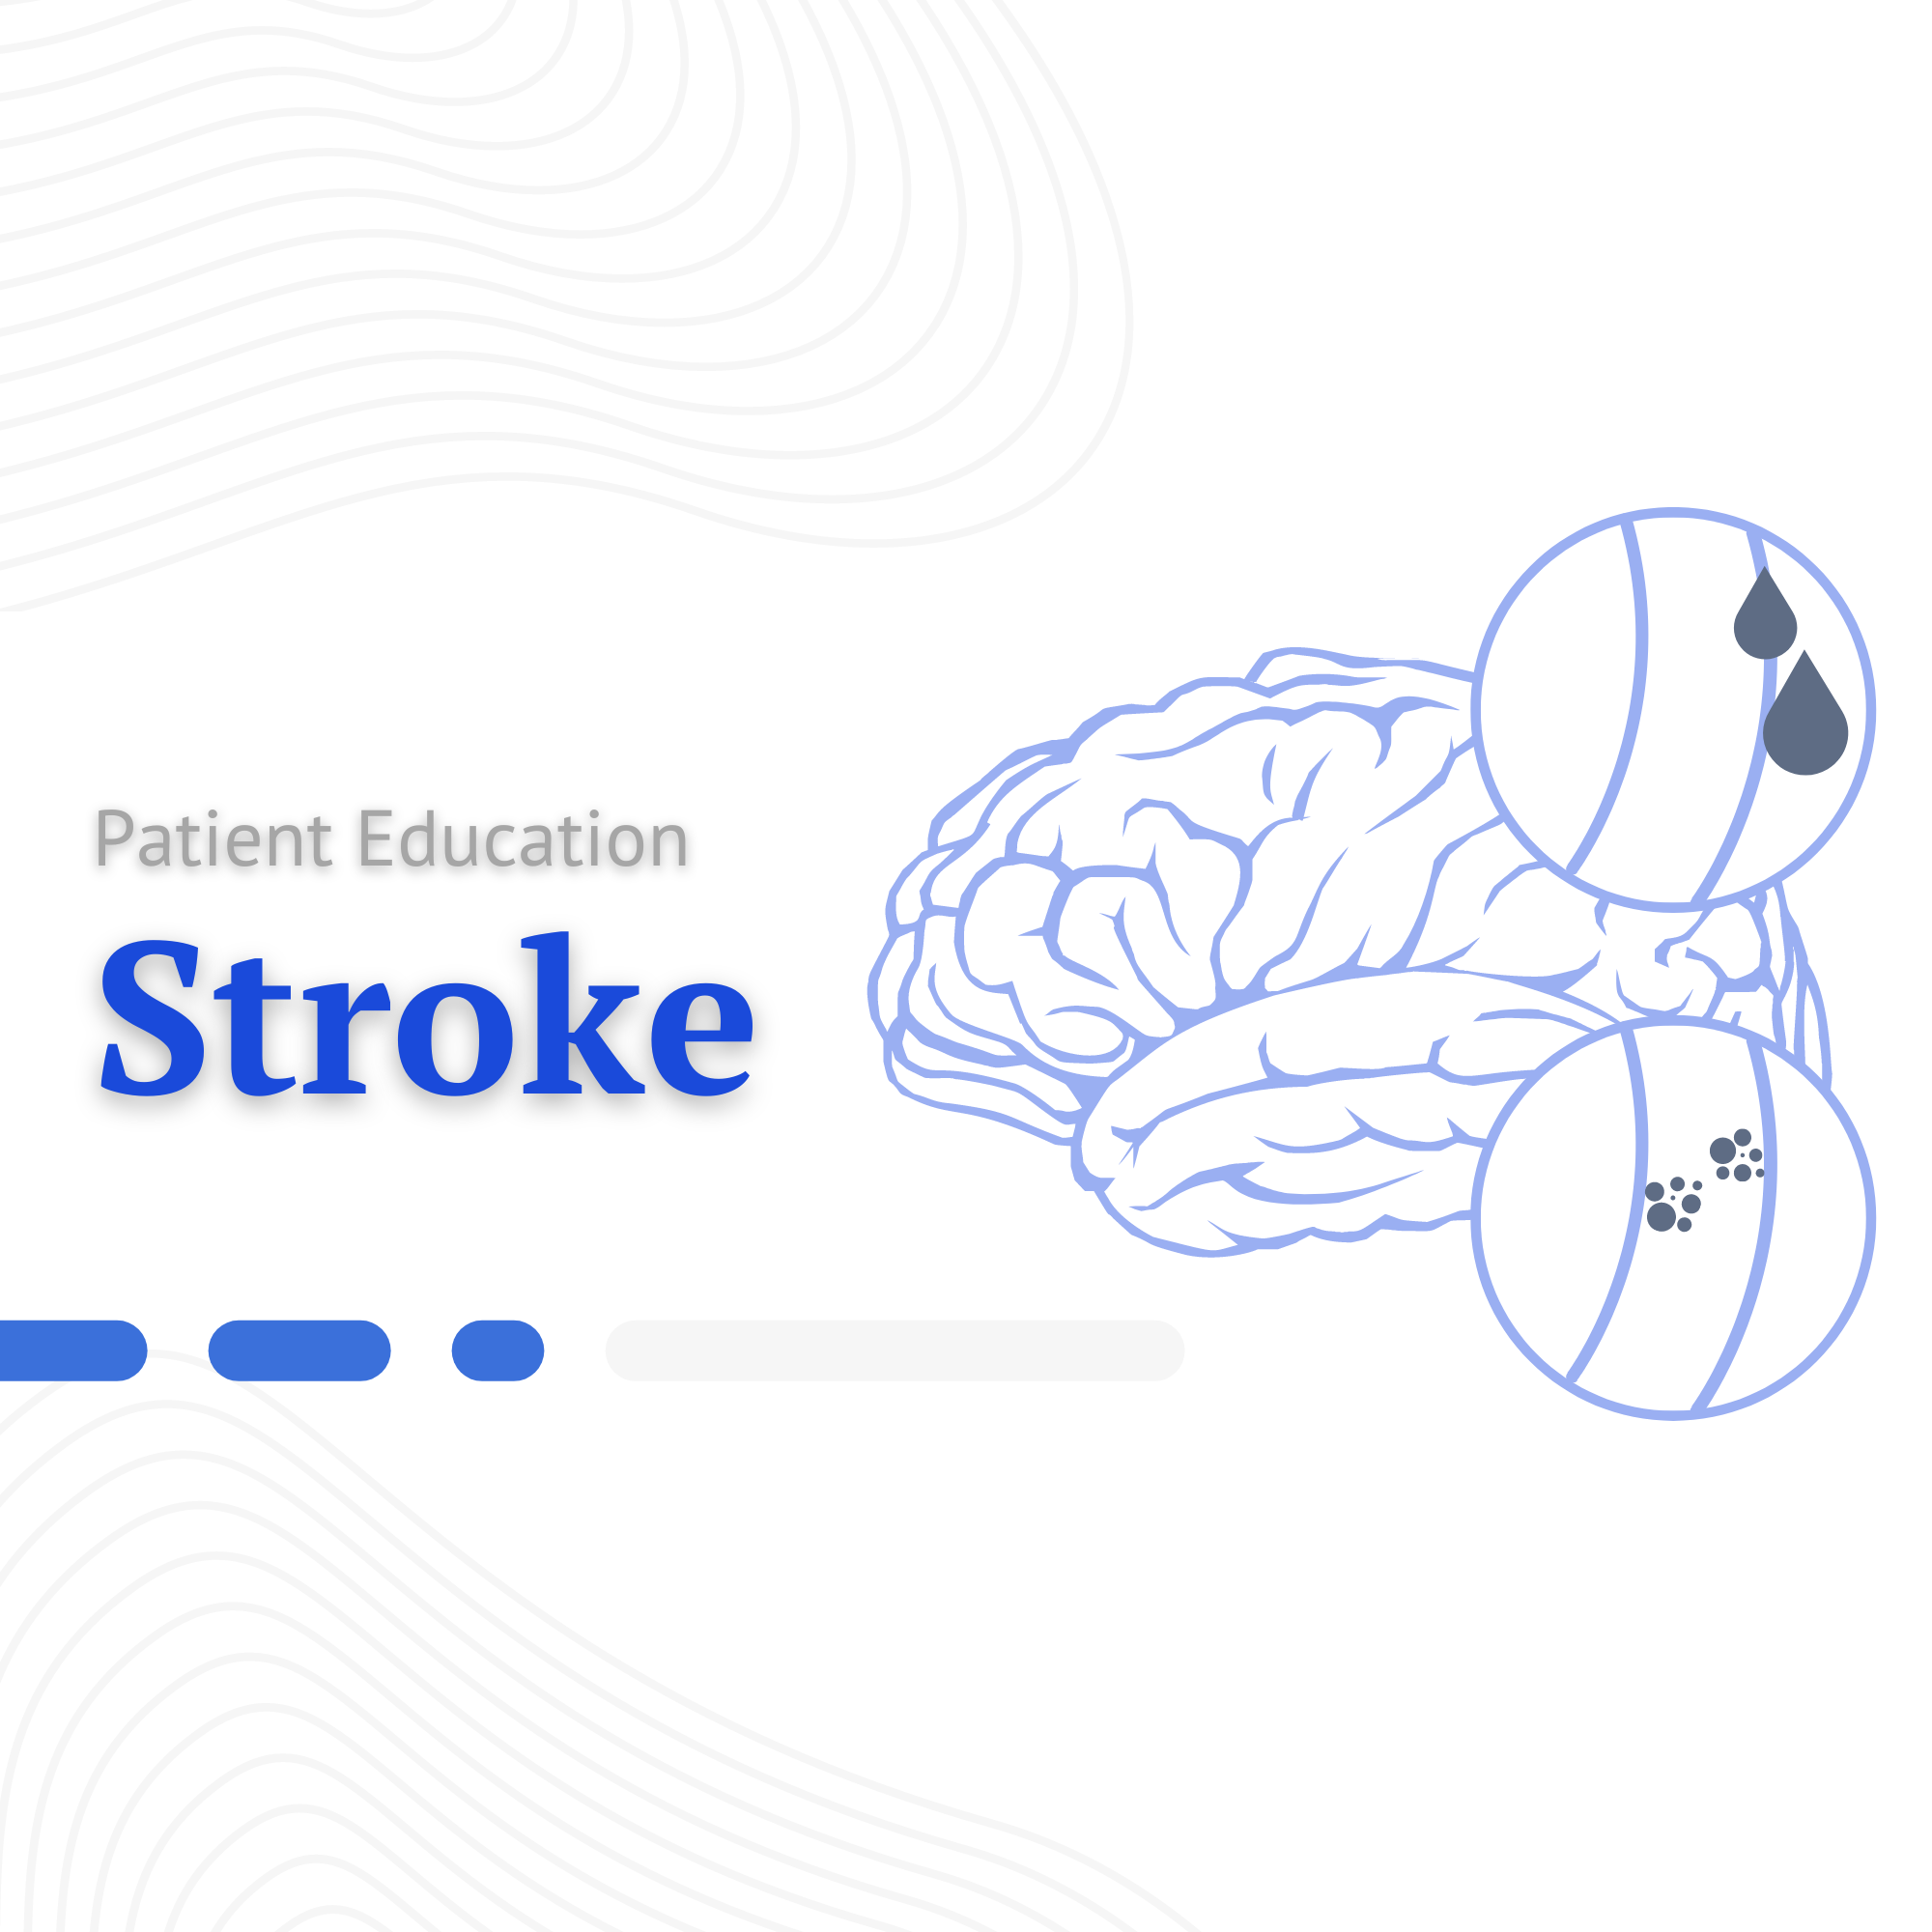 Stroke Cover Photo.png